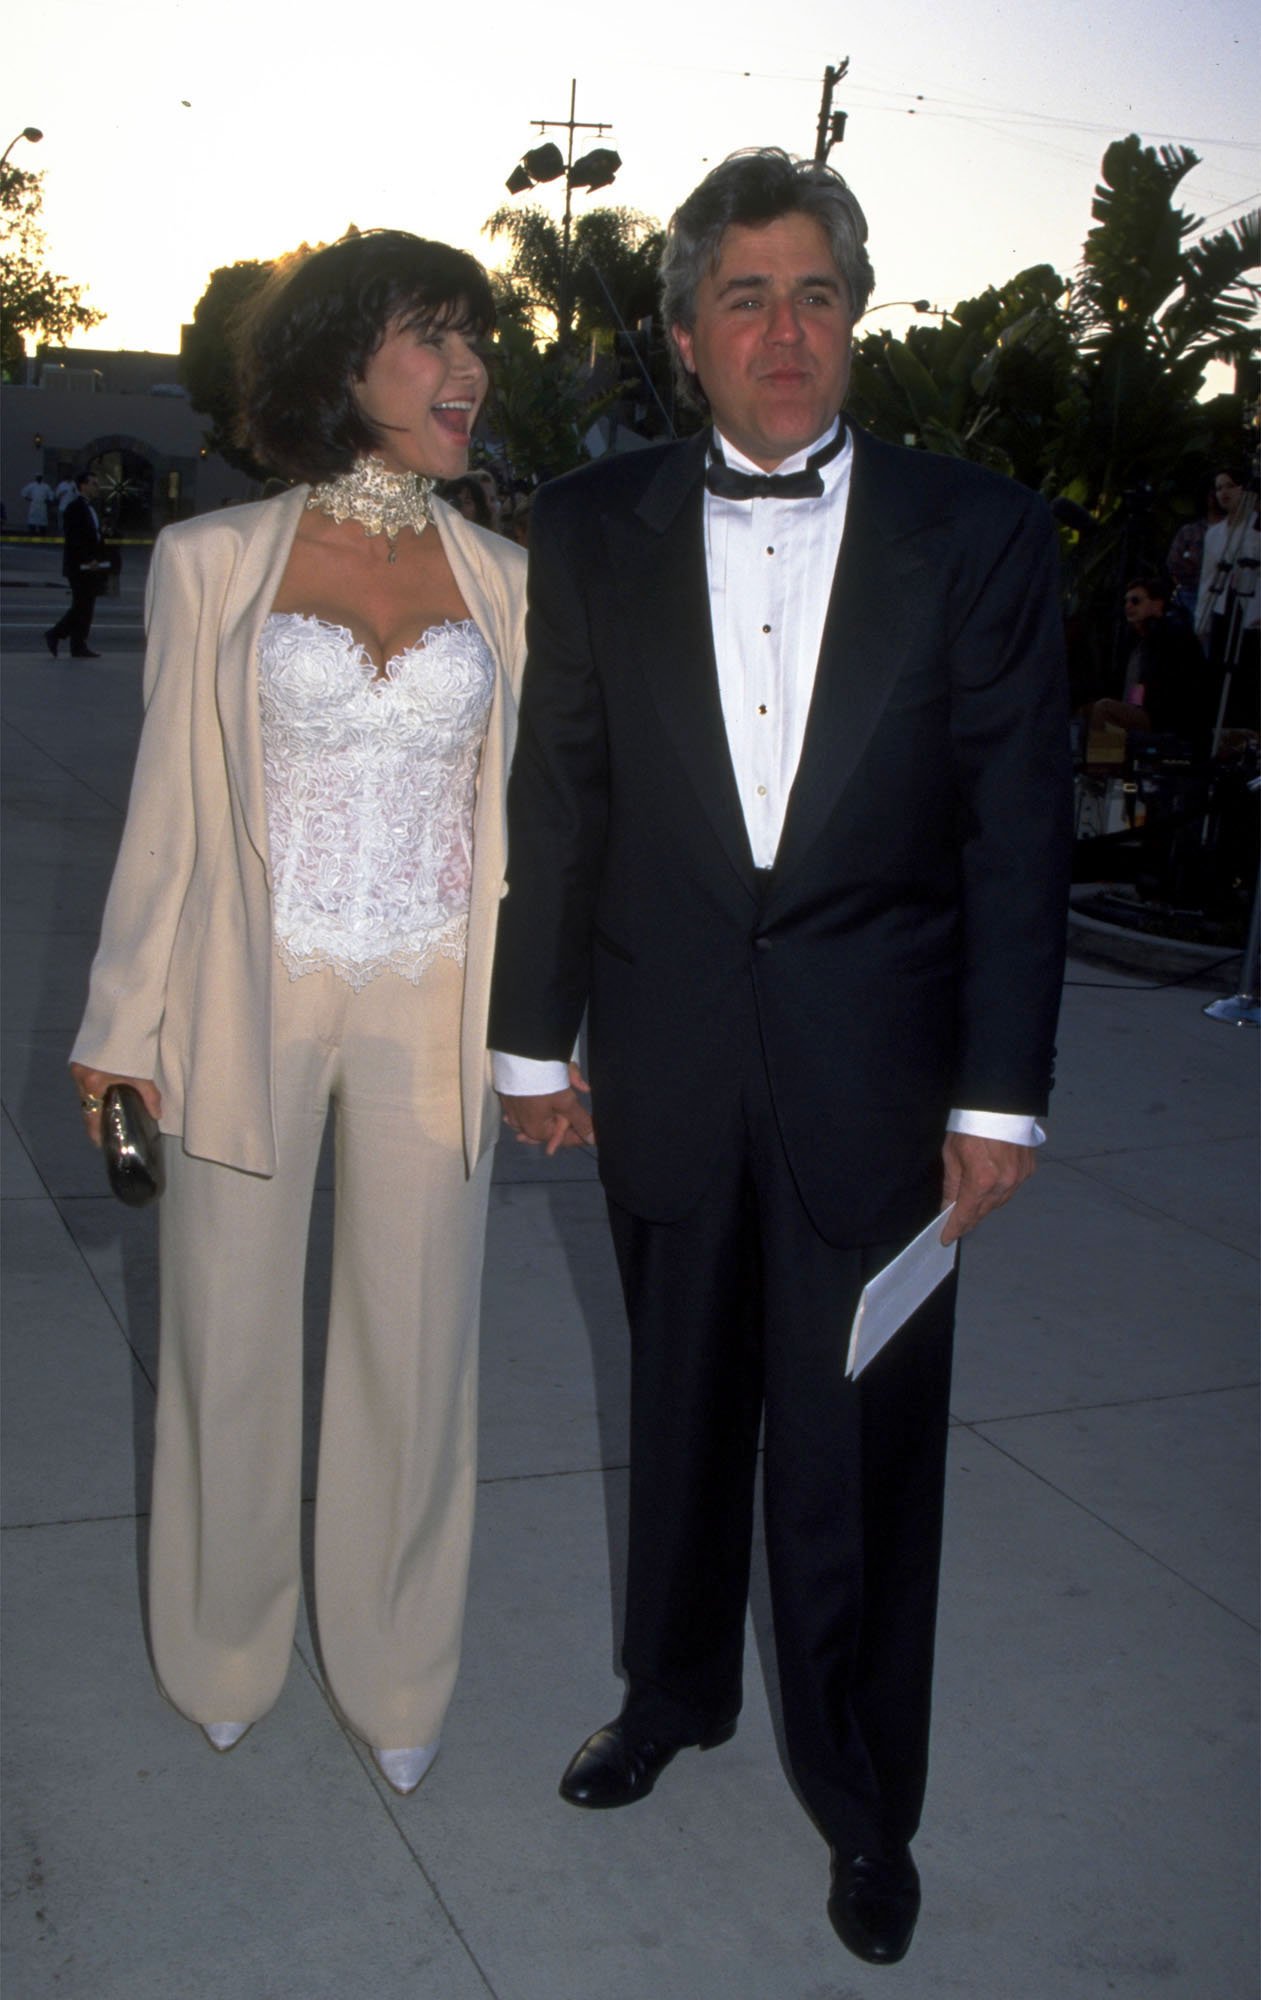 Mavis and Jay Leno posing for a photo on March 5, 1999. | Source: Getty Images